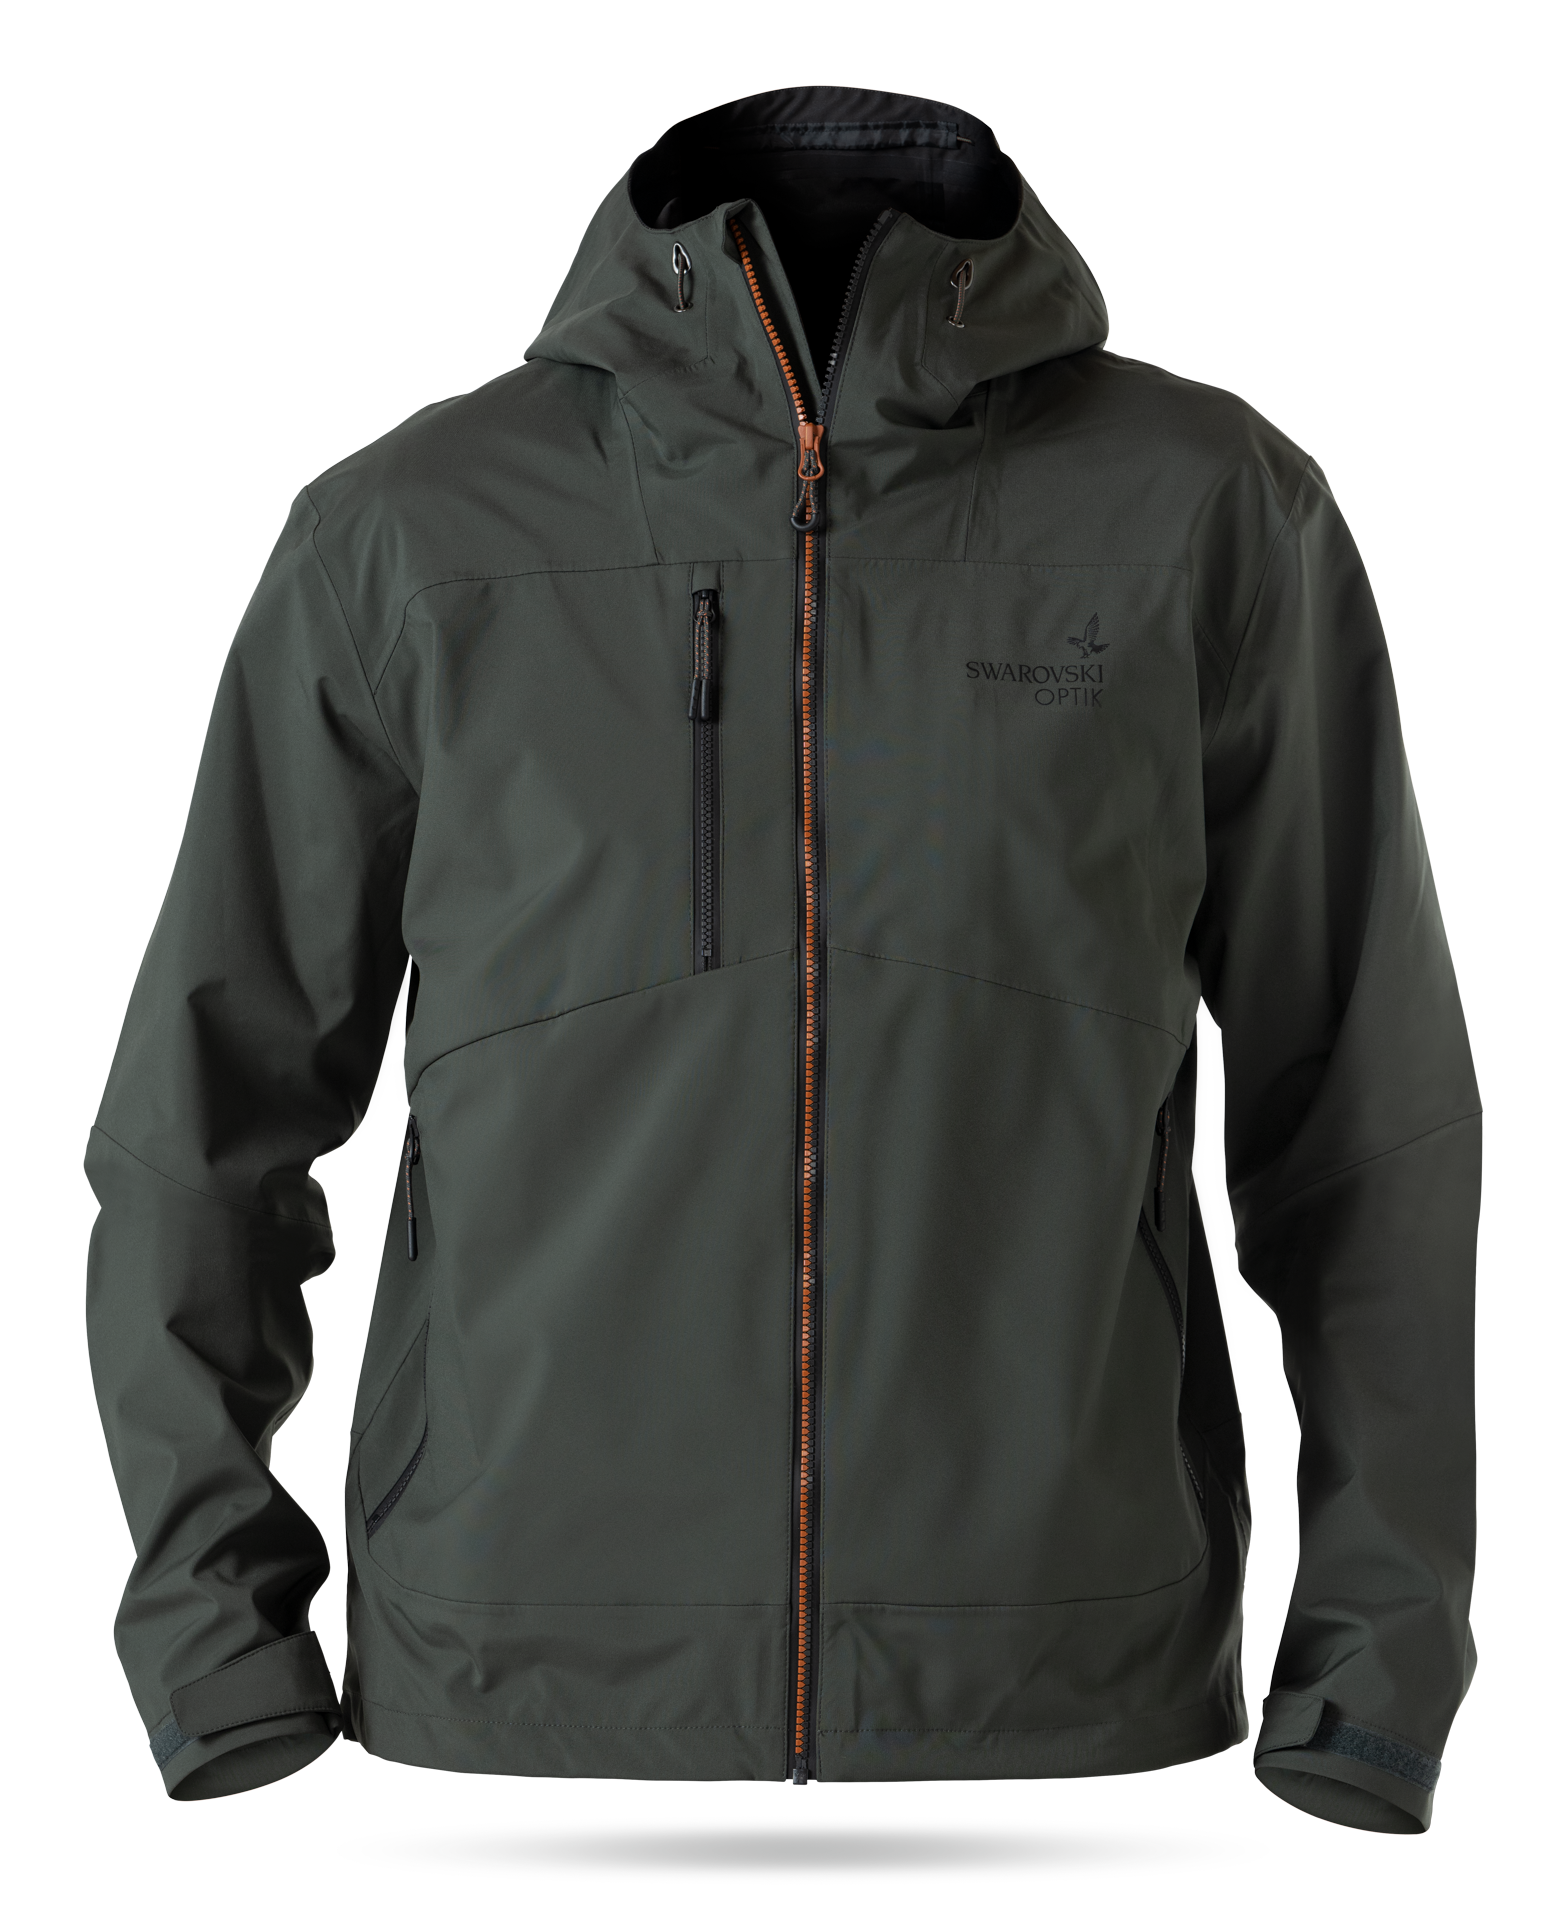 https://images.ctfassets.net/pvkenuwtinkd/3z3cHwGesRtmZGrBOQHKoY/d59db86ccfae05d02164ca18d9bede1a/K21_OJ_Outdoor_Jacket_m_front_DSC1660_RGB_small.png